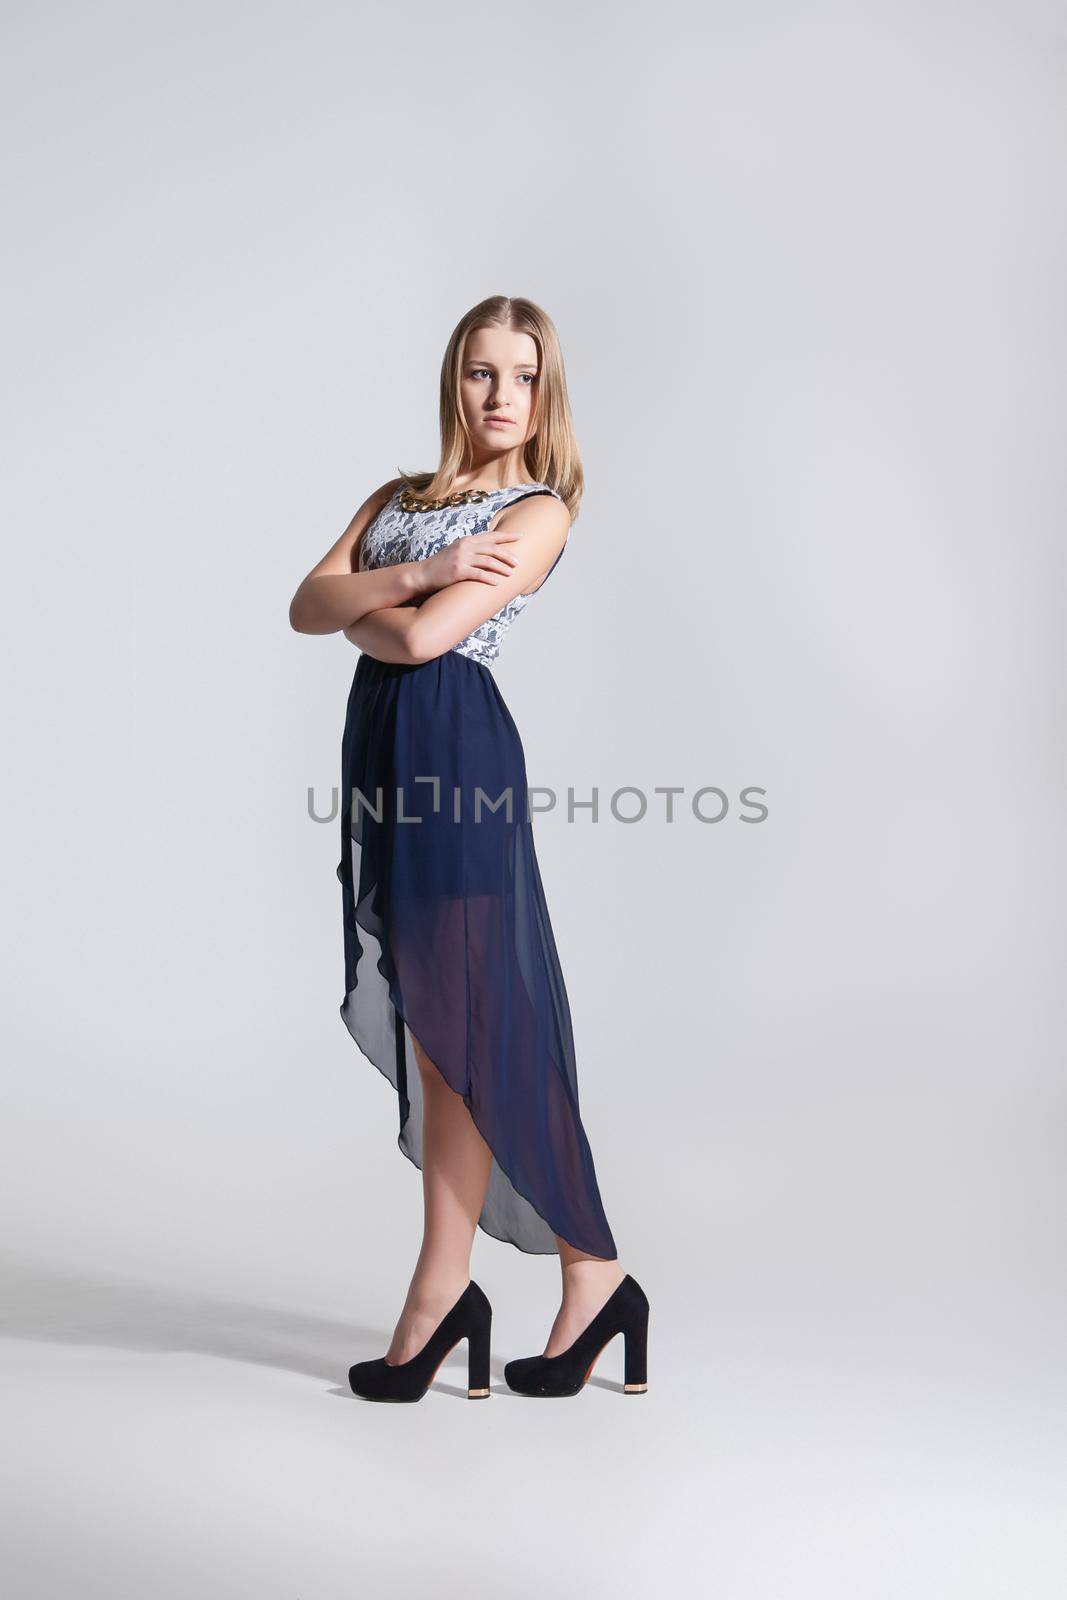 Full Length Portrait of a Sexy Blonde Woman in Long Blue Fashion Dress